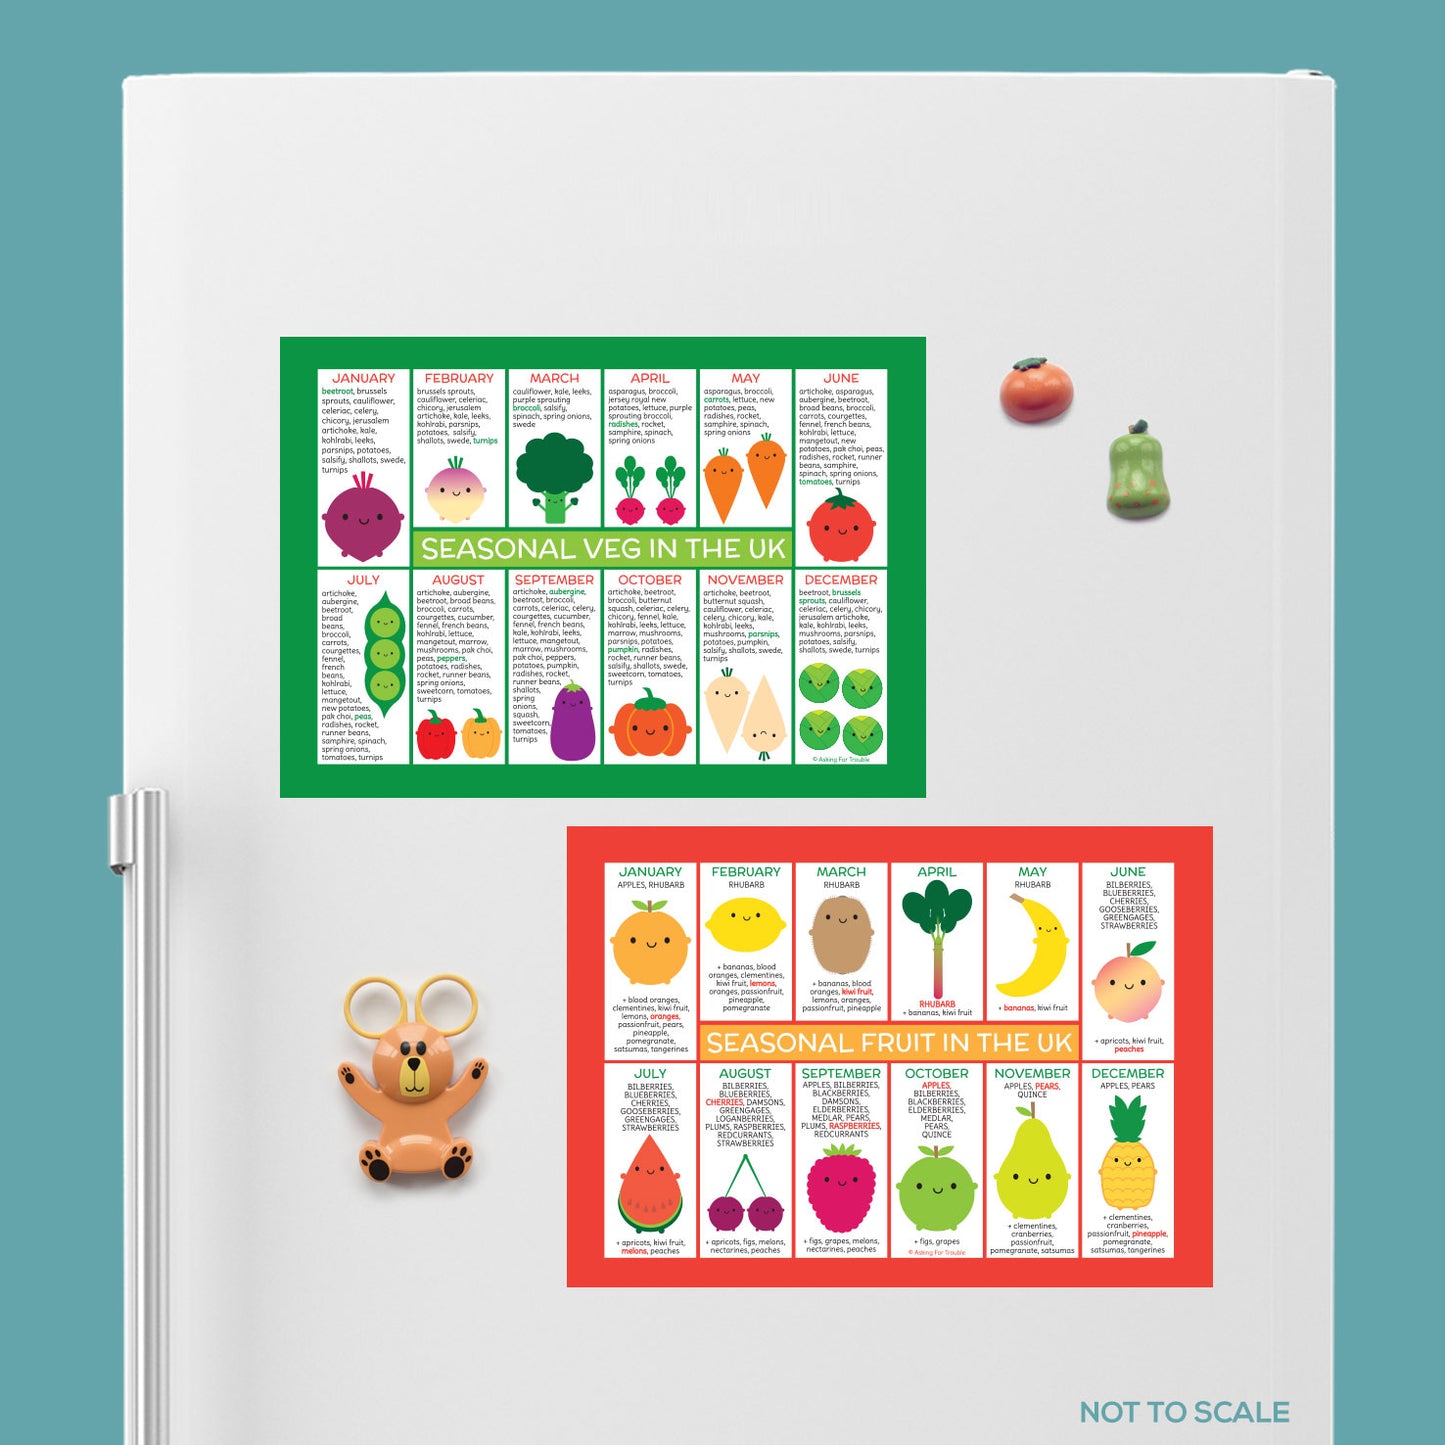 Kawaii illustrated seasonal fruit and vegetables charts for the UK displayed on a fridge door (not to scale)